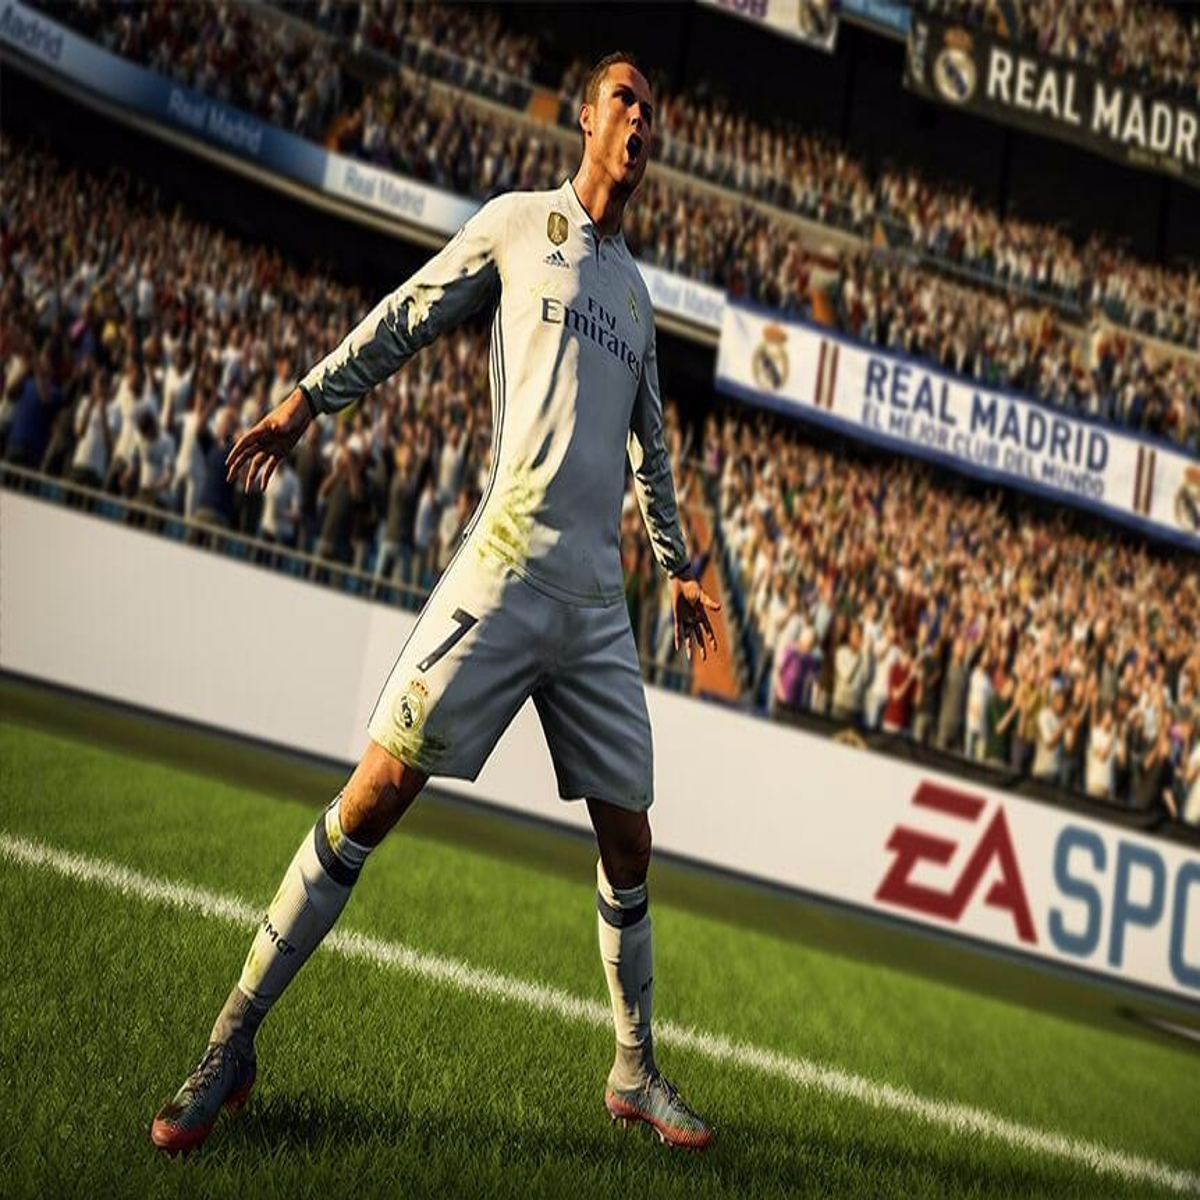 FIFAGAME hints for FIFA 18 Ronaldo Edition APK for Android Download